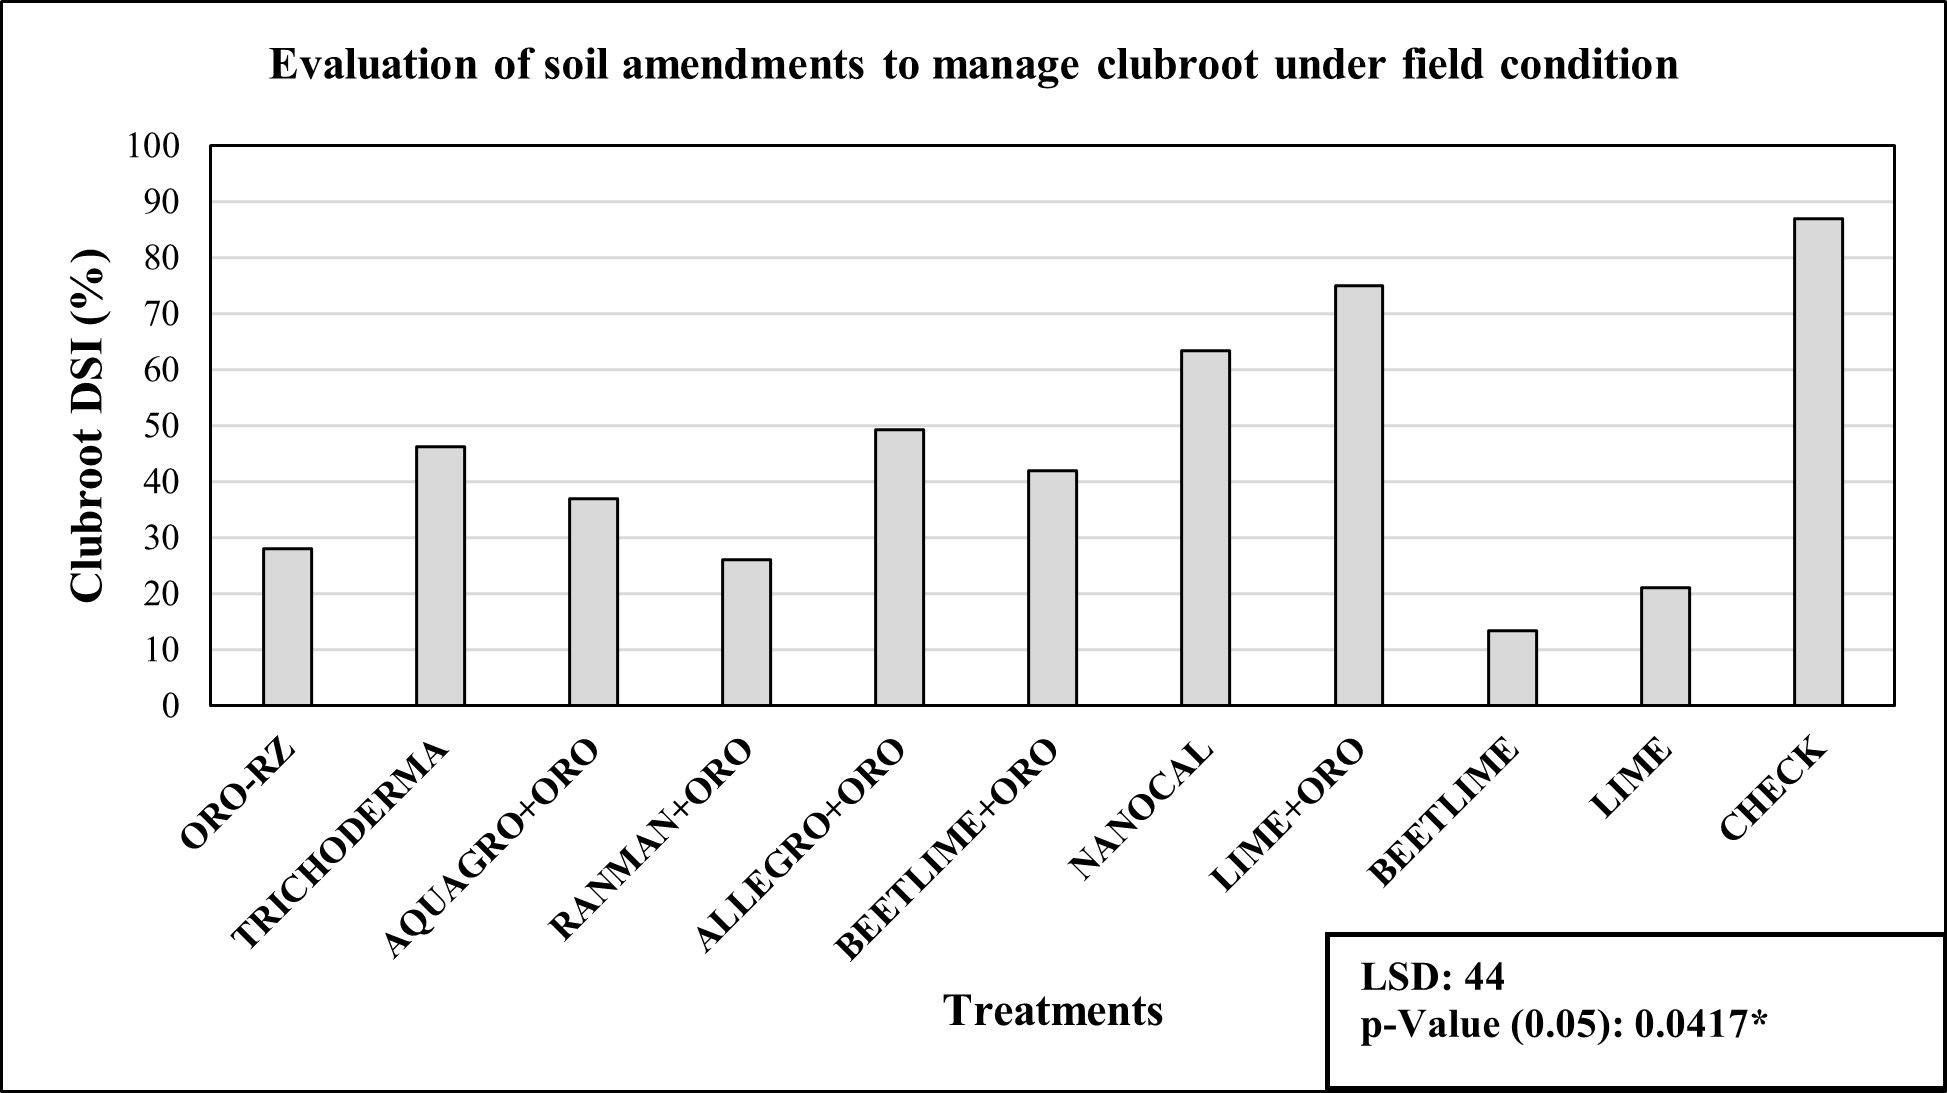 Graphical representation of clubroot management of various soil treatments.